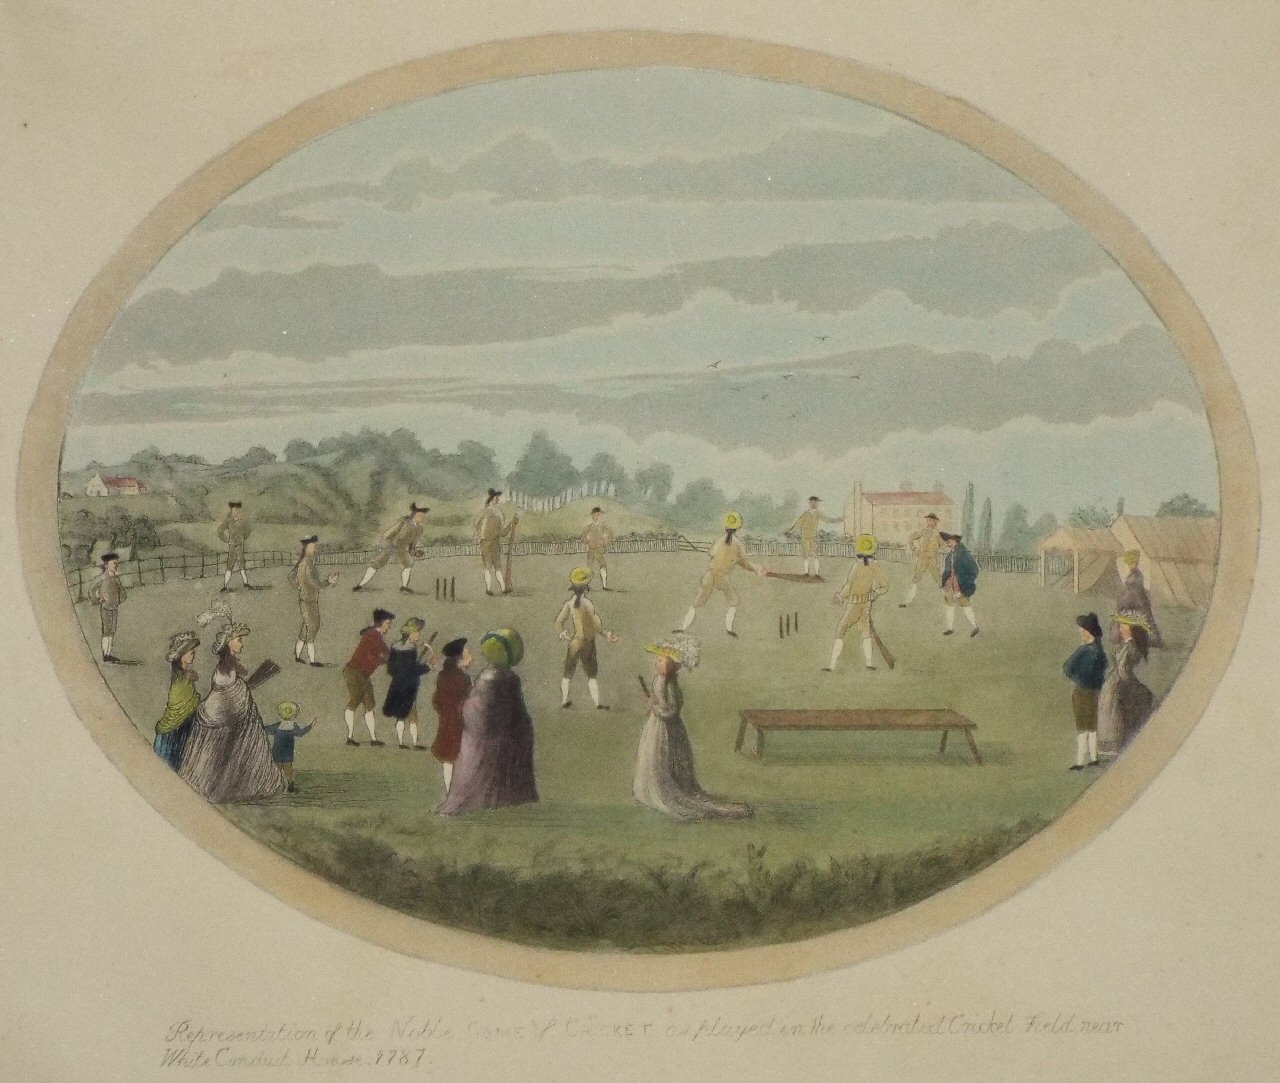 Etching with aquatint - Representation of the Noble Game of Cricket as played in the celebrated Cricket Field near White Conduit House 1787